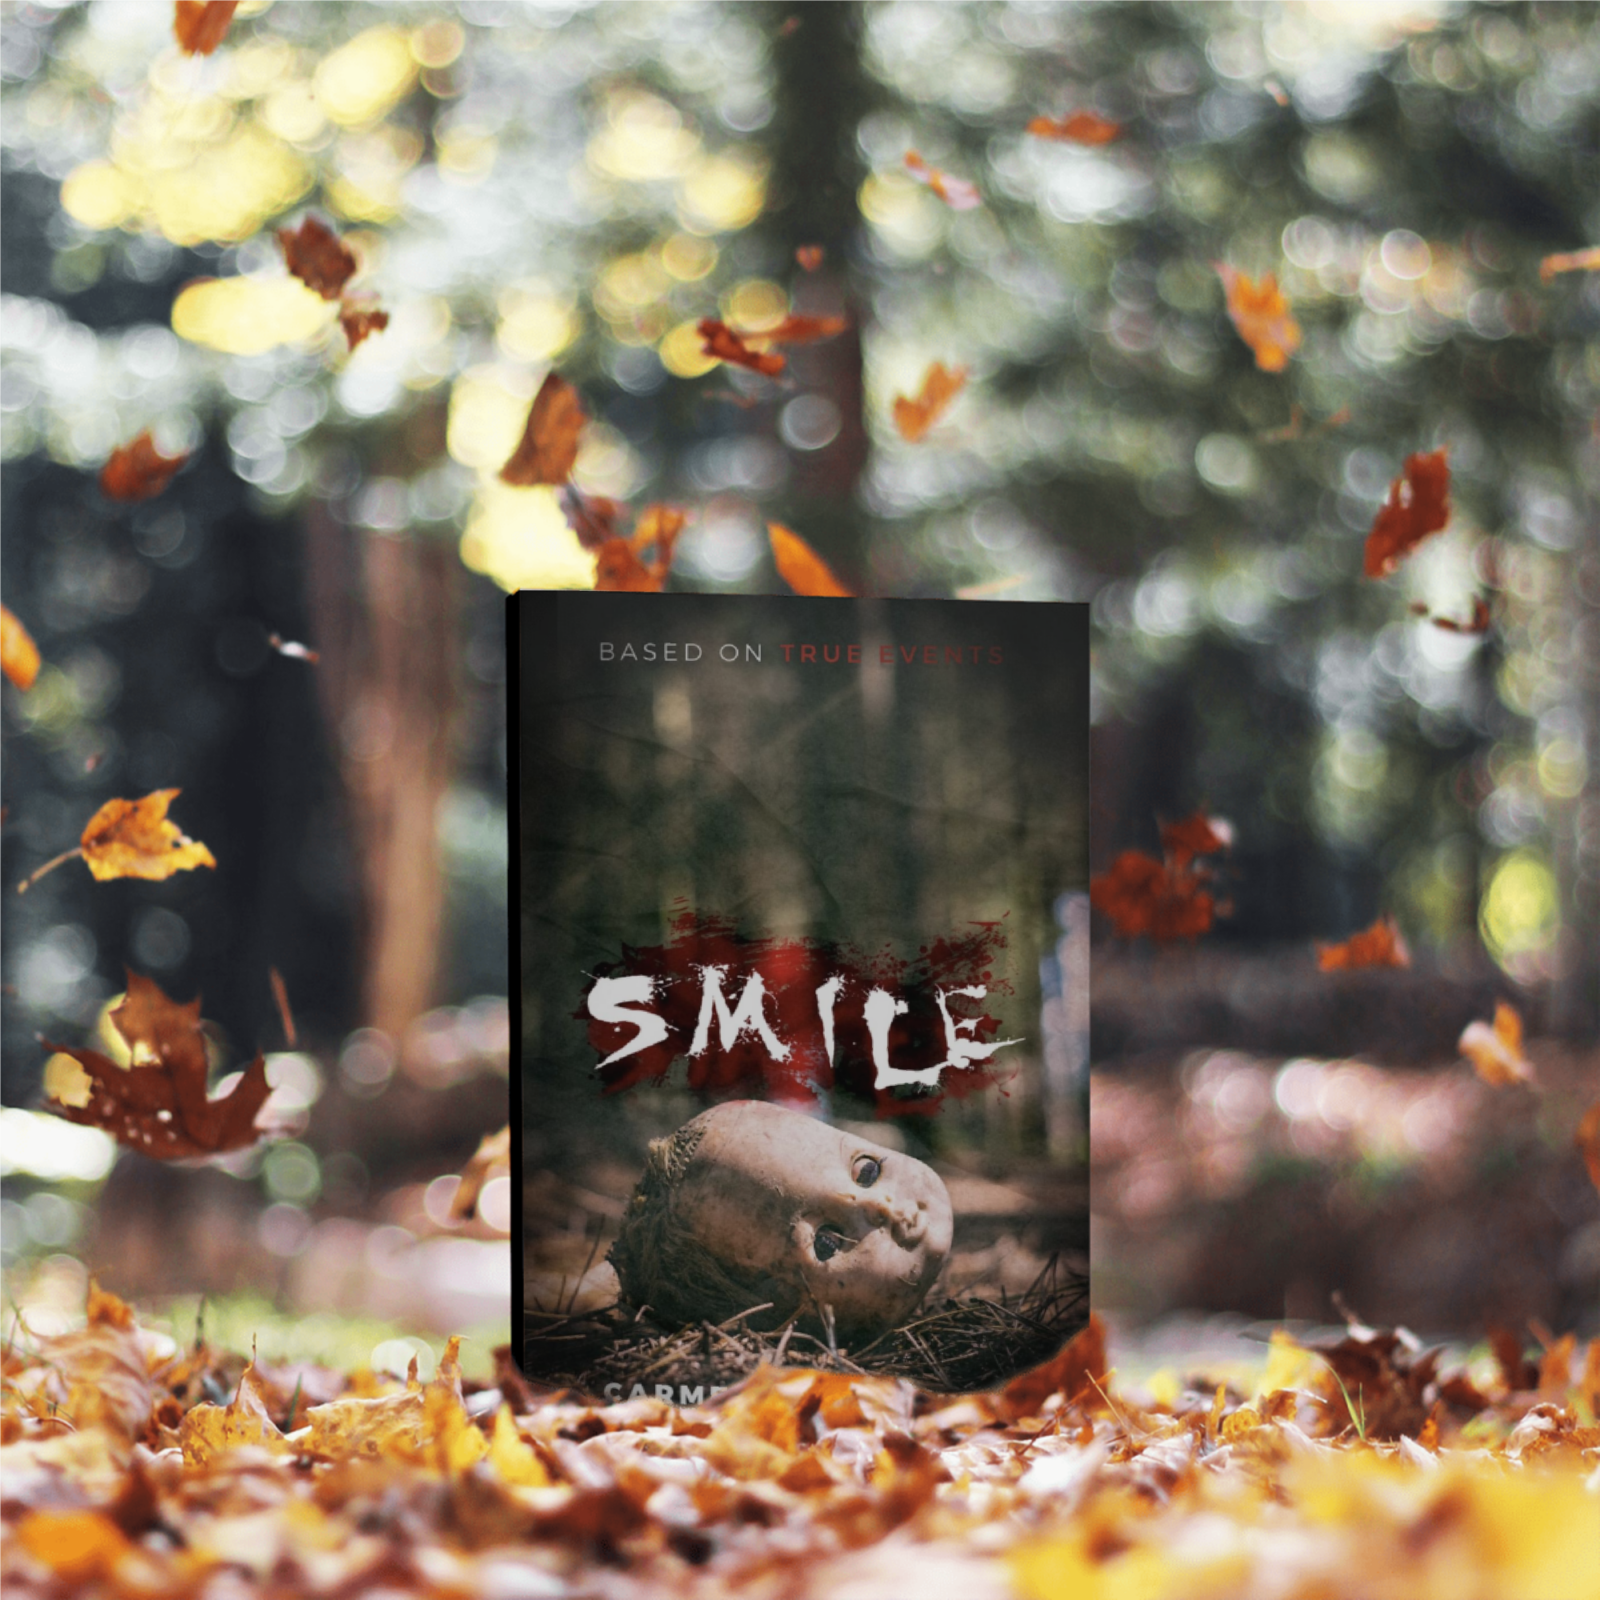 DC officer and author Carmelo Rodriguez publishes new novel "to smile" on Halloween